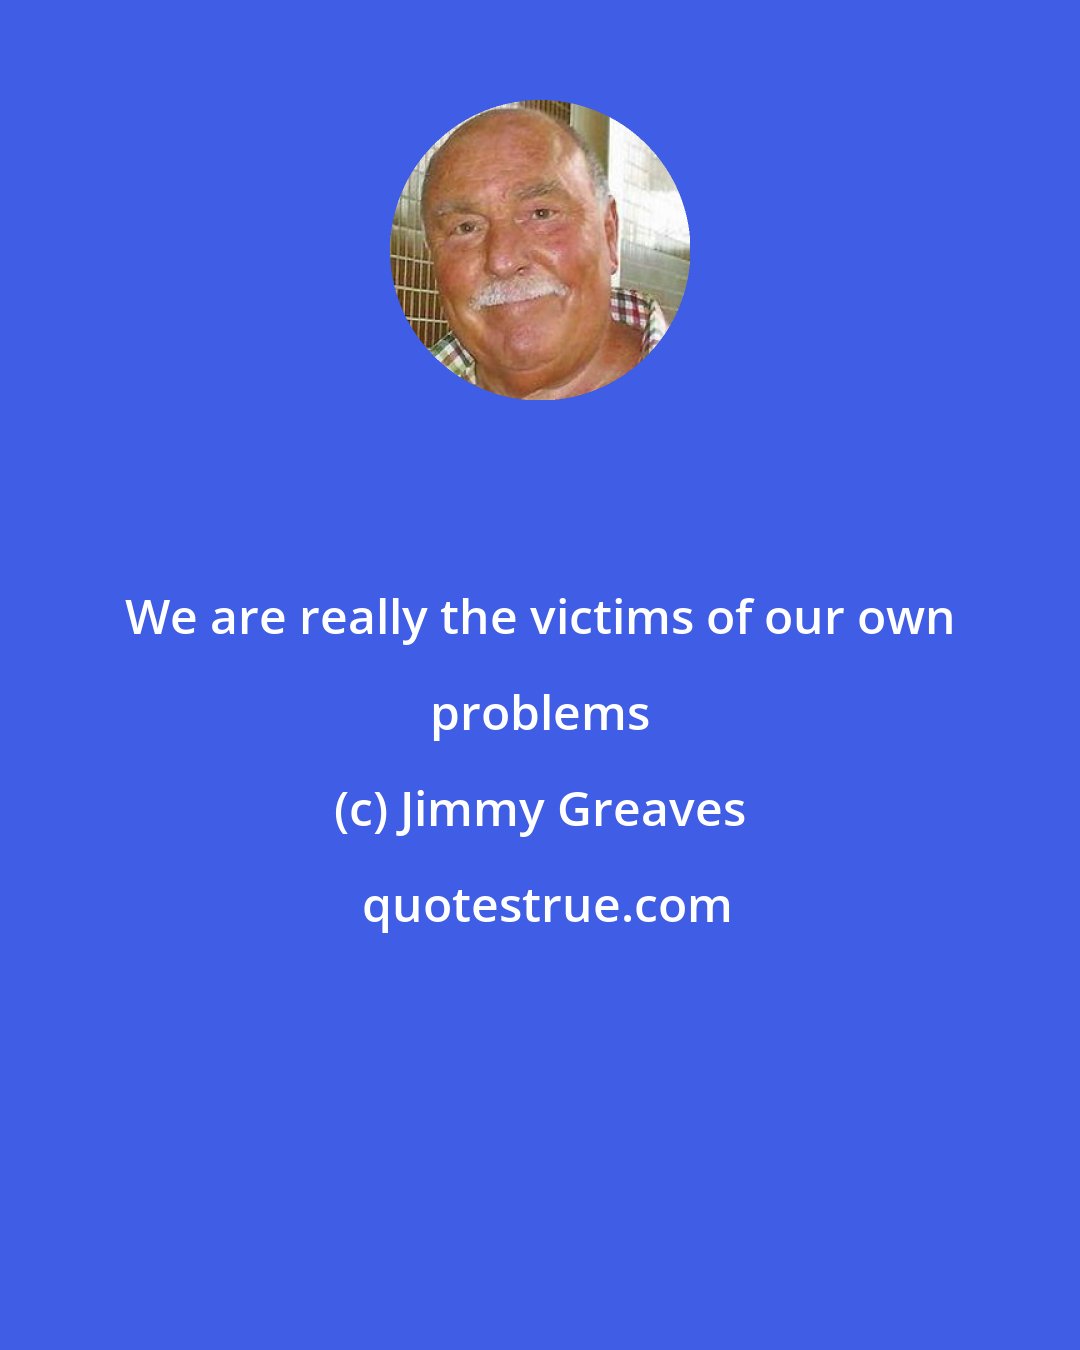 Jimmy Greaves: We are really the victims of our own problems